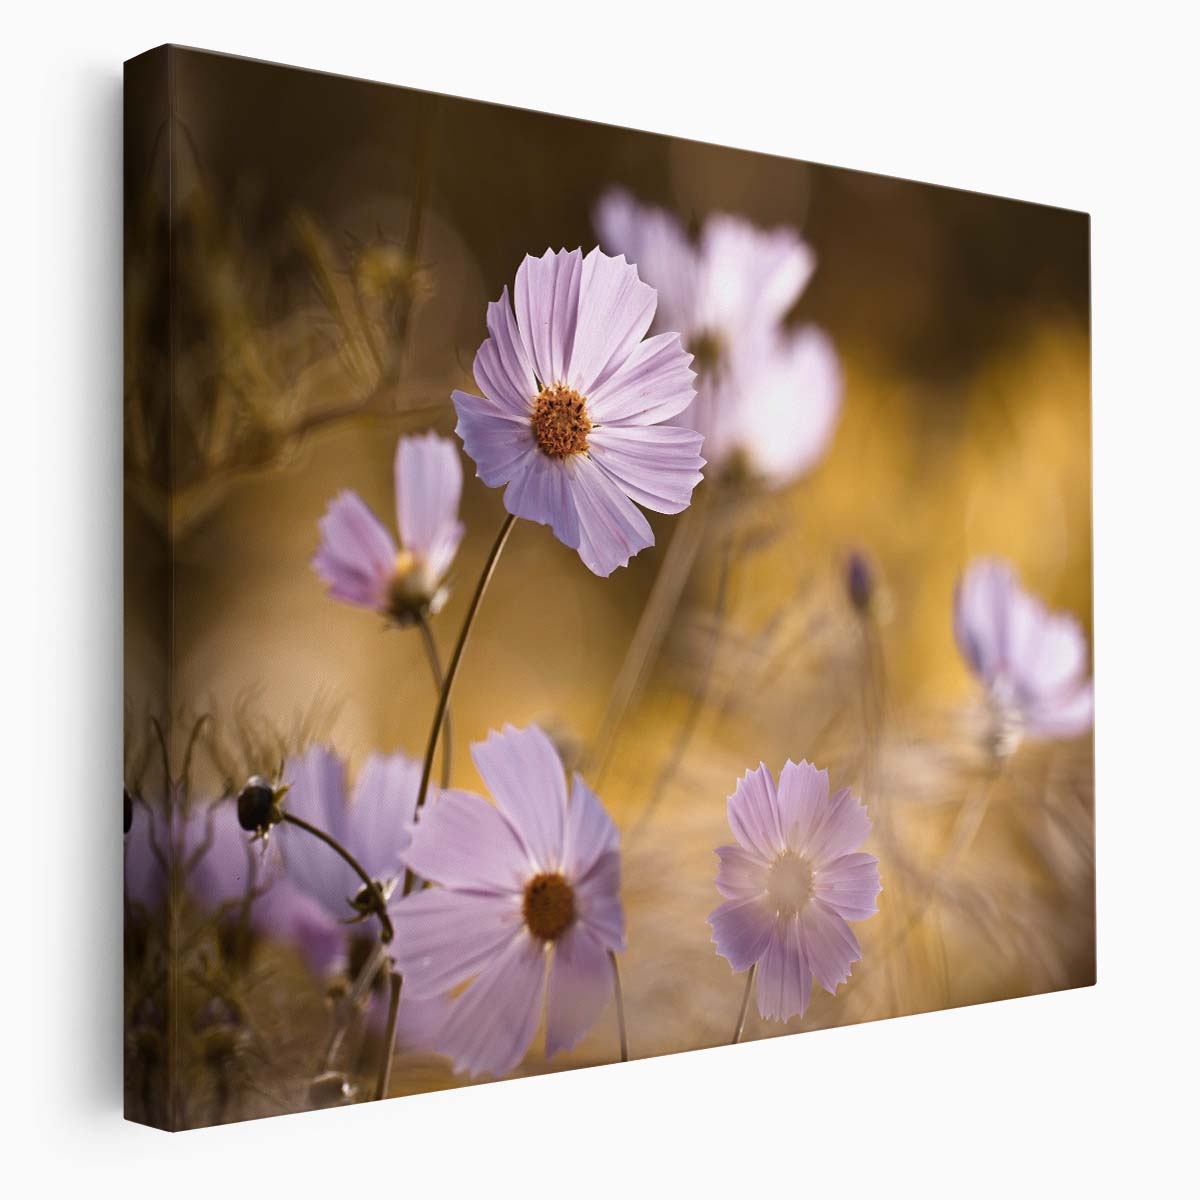 Delicate Pink Cosmos Floral Macro Garden Wall Art by Luxuriance Designs. Made in USA.